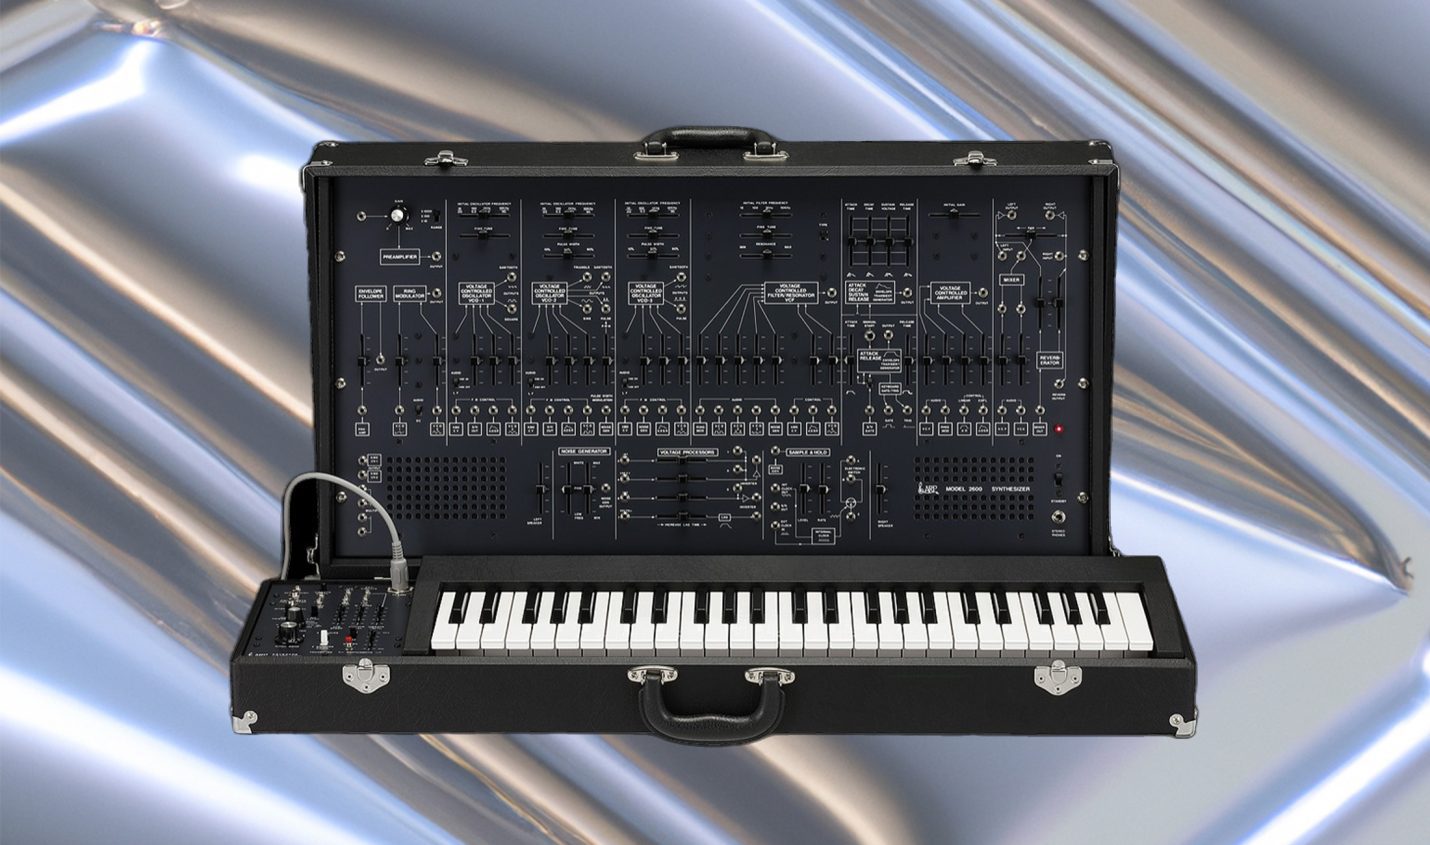 Korg: May the ARP 2600 be with you